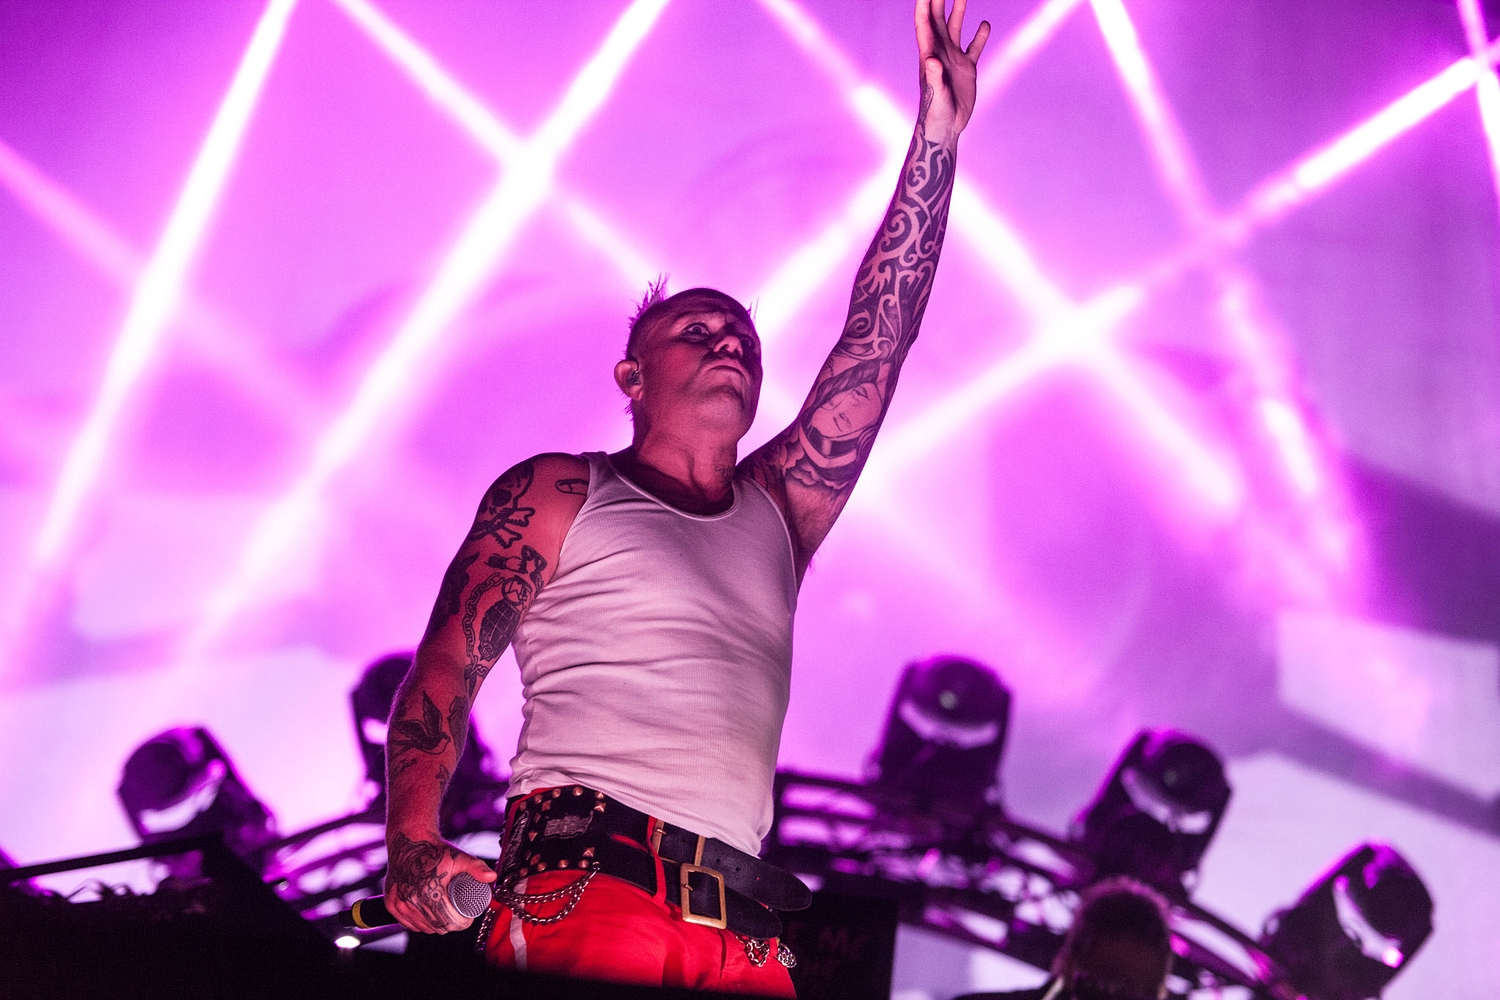 A campaign has launched to get The Prodigy’s ‘Firestarter’ to number one